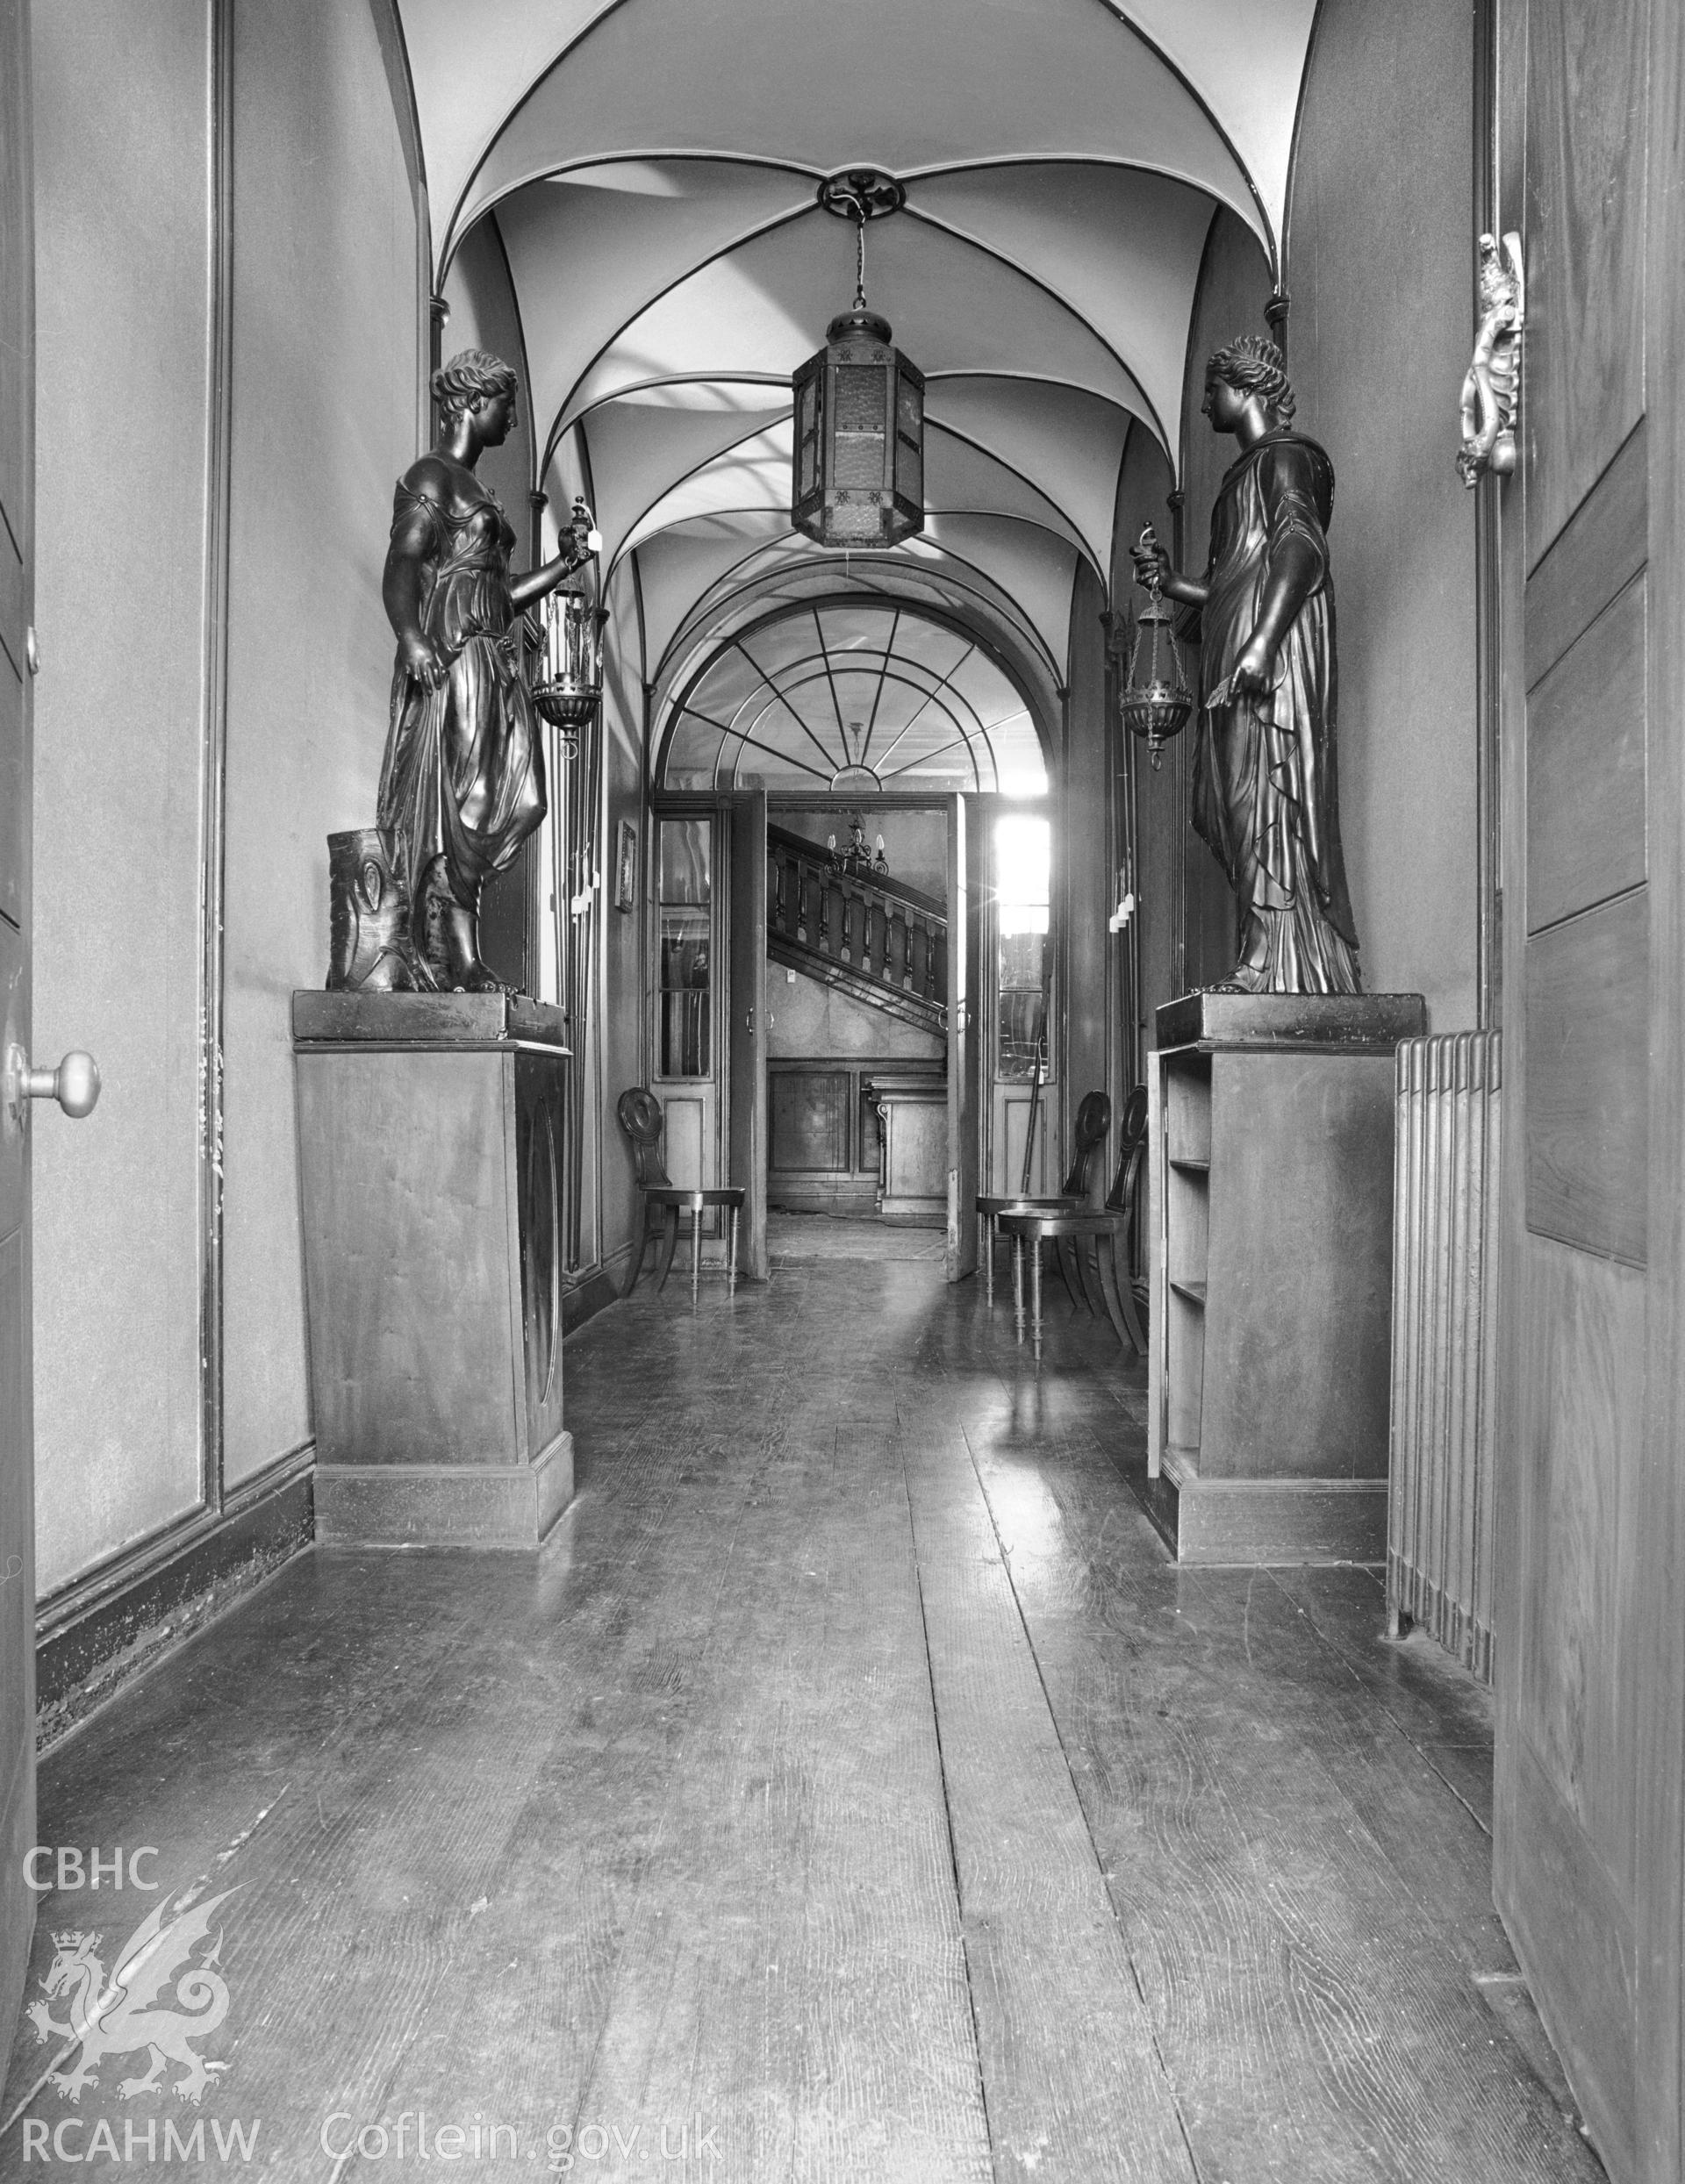 Entrance Hall at Penpont Manor on east side of the house